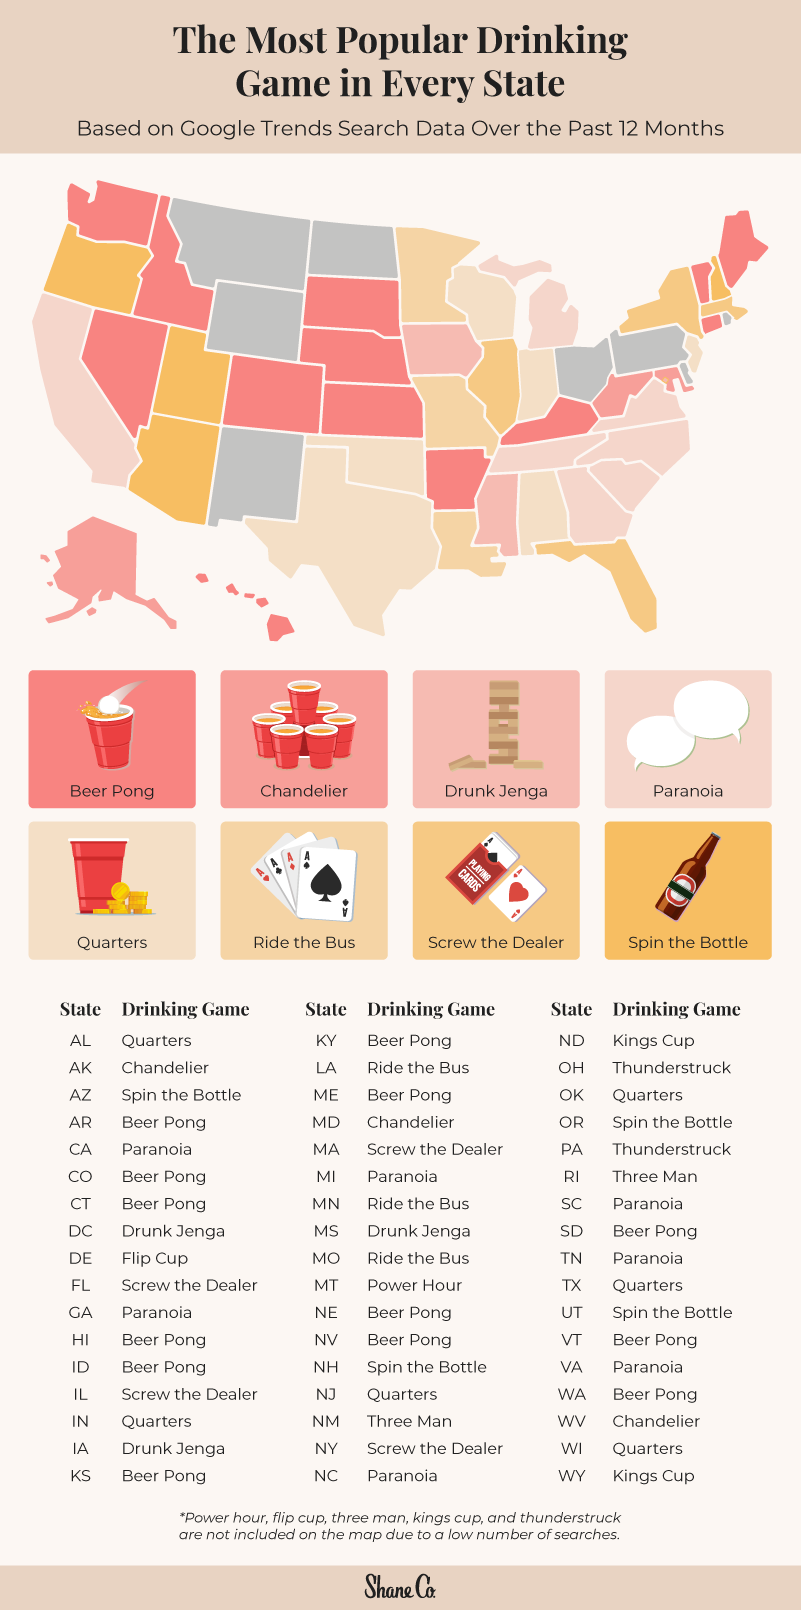 Chart of the most popular drinking games in every U.S. state.